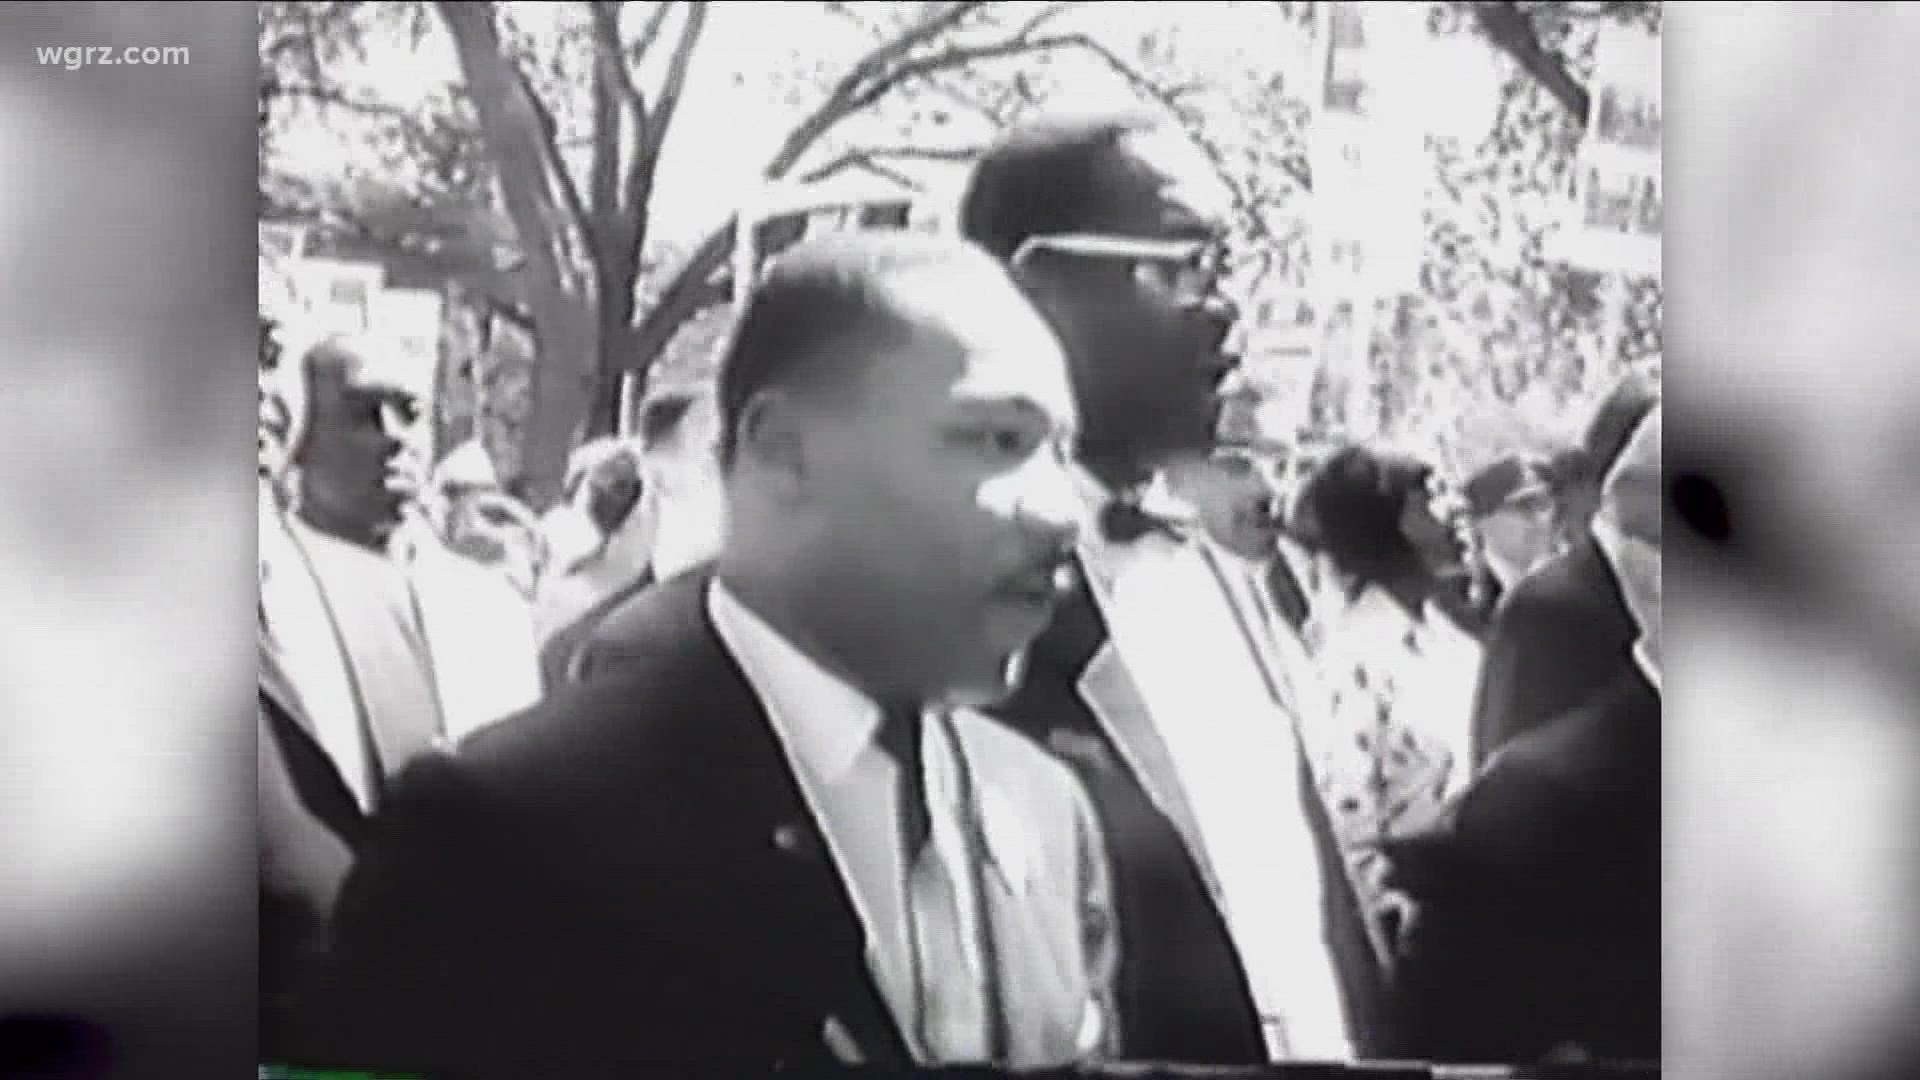 A look at race relations on Martin Luther King, Jr. day